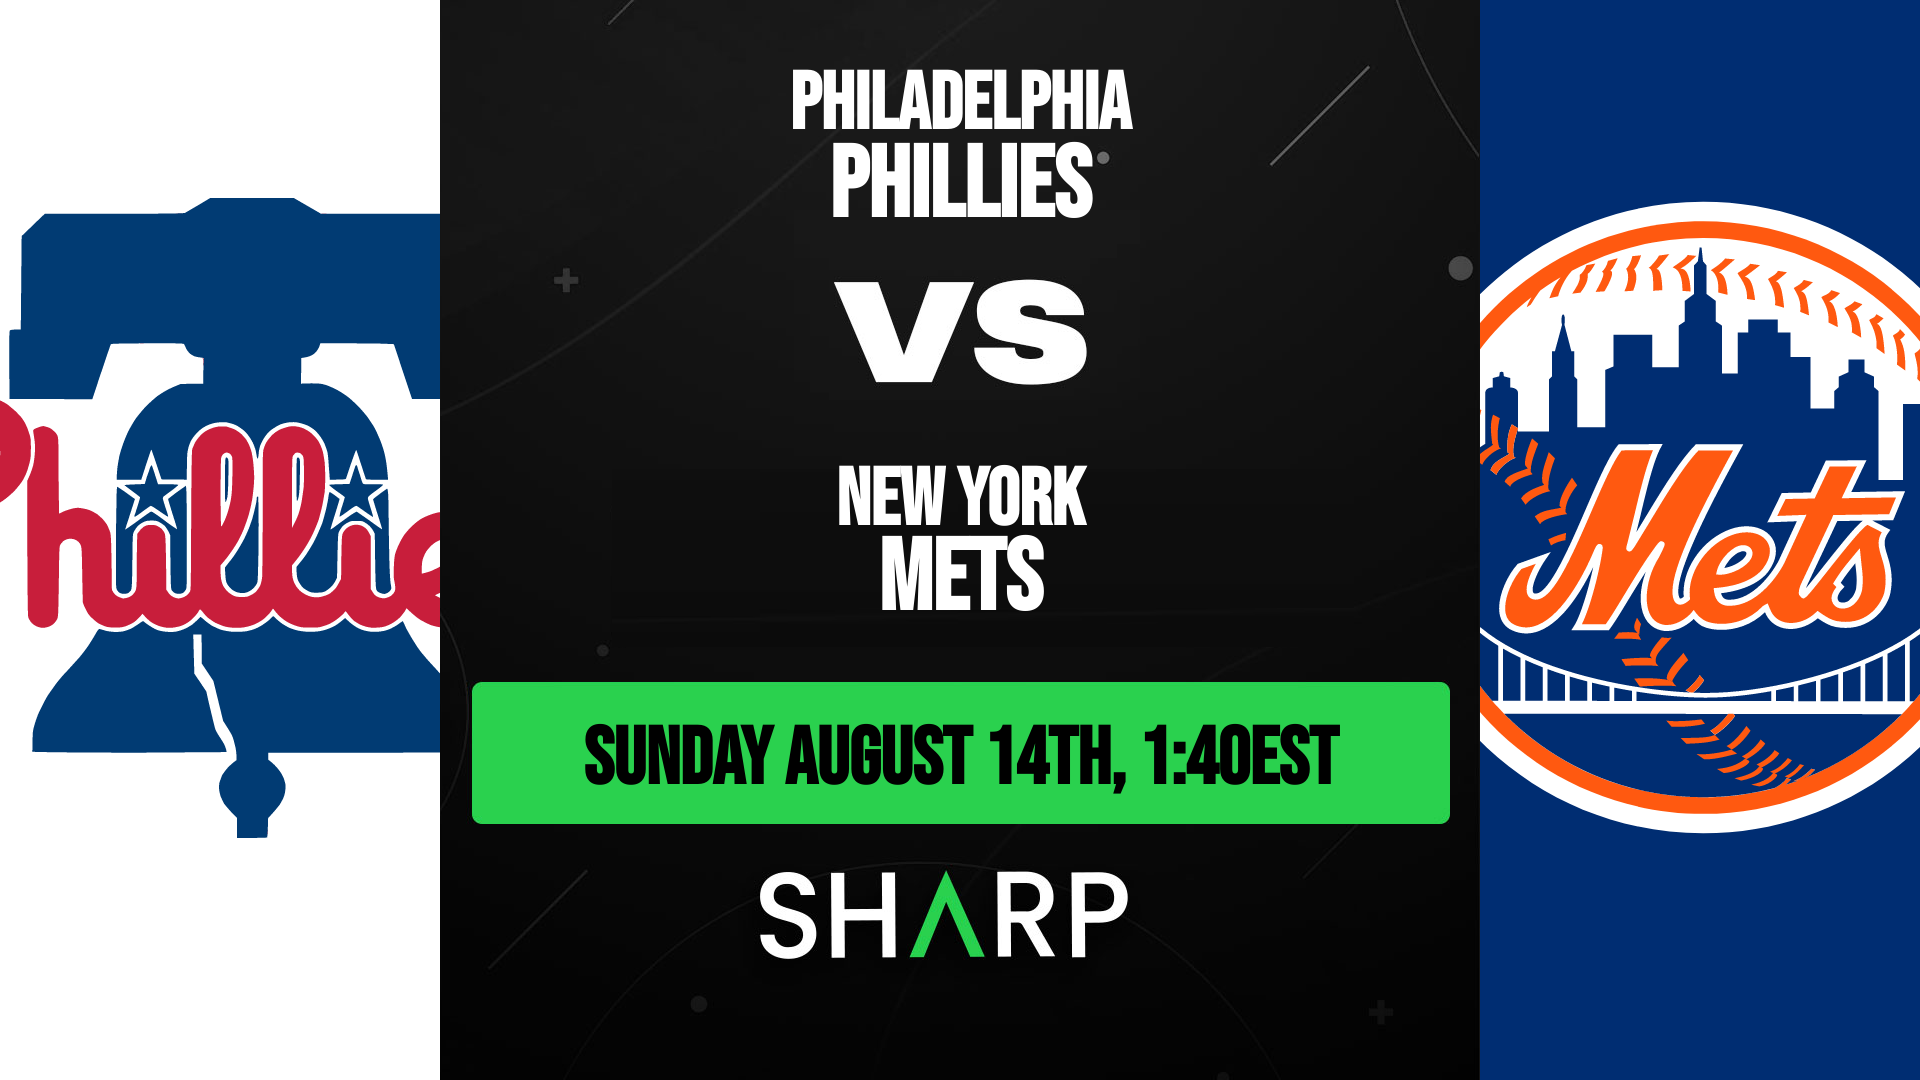 Philadelphia Phillies @ New York Mets Matchup Preview - August 14th, 2022